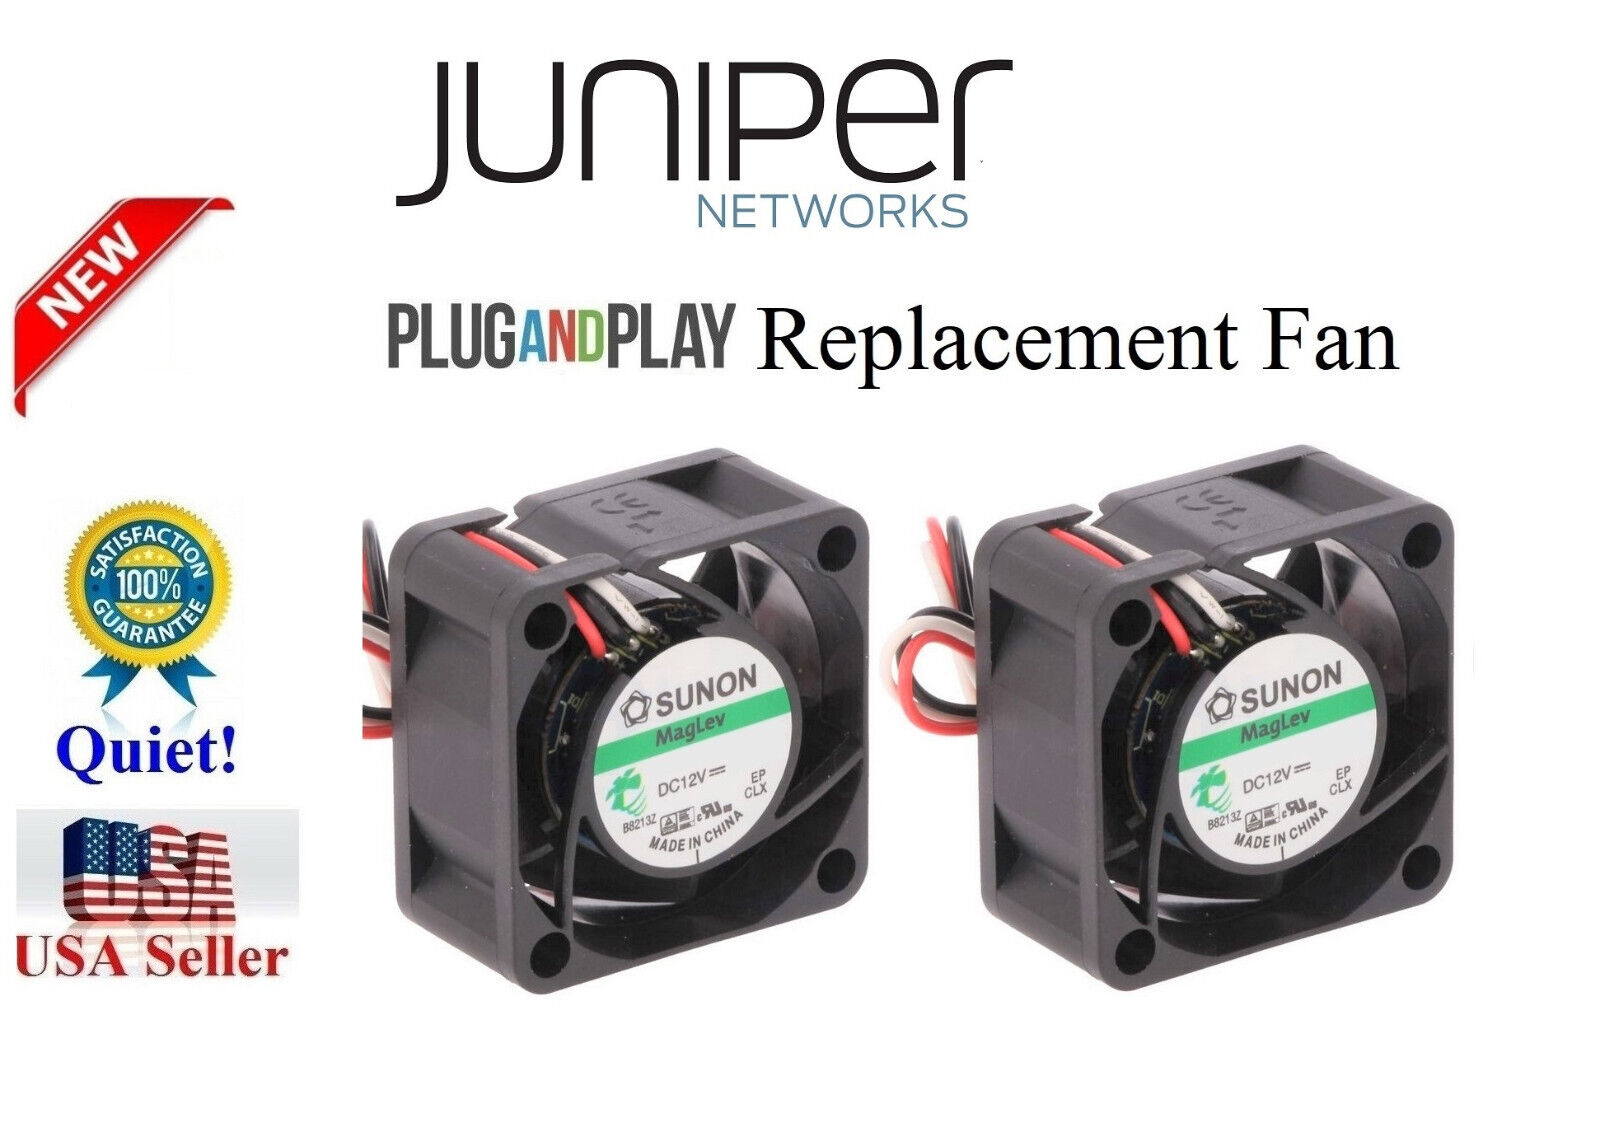 2x Quiet version (27.5dBA ) Replacement Fans for Juniper Networks EX3300-48T-BF